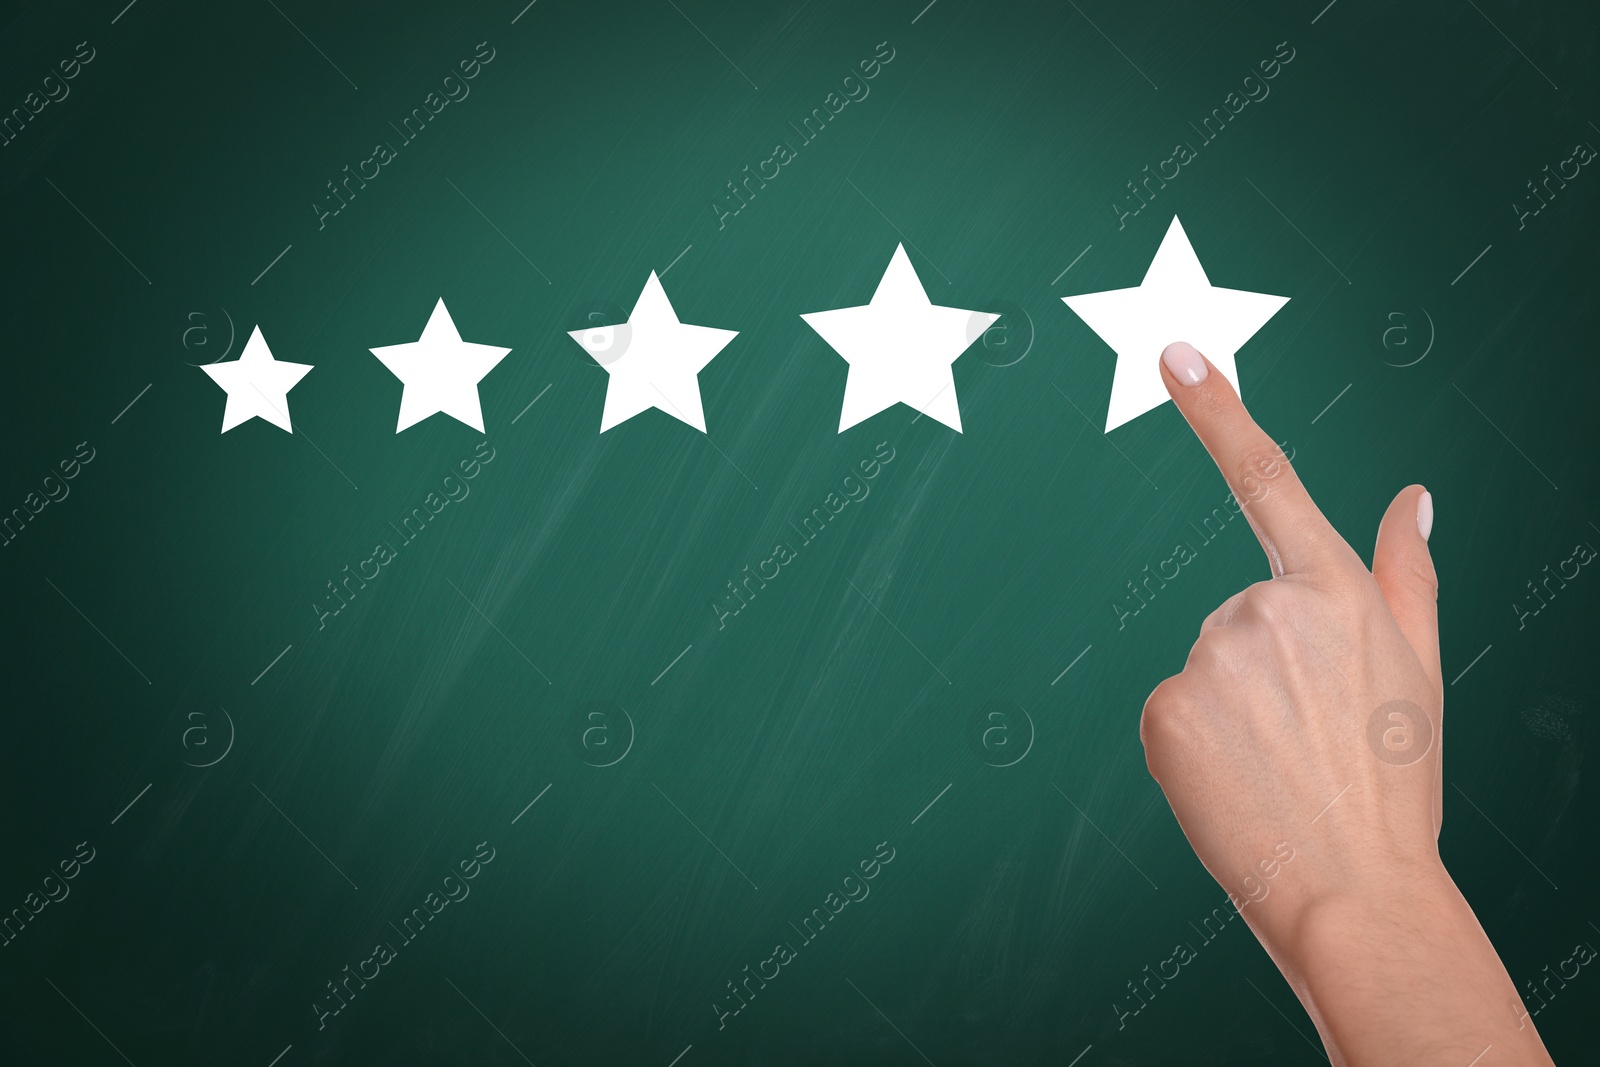 Image of Quality rating. Woman pointing at stars on chalkboard, closeup